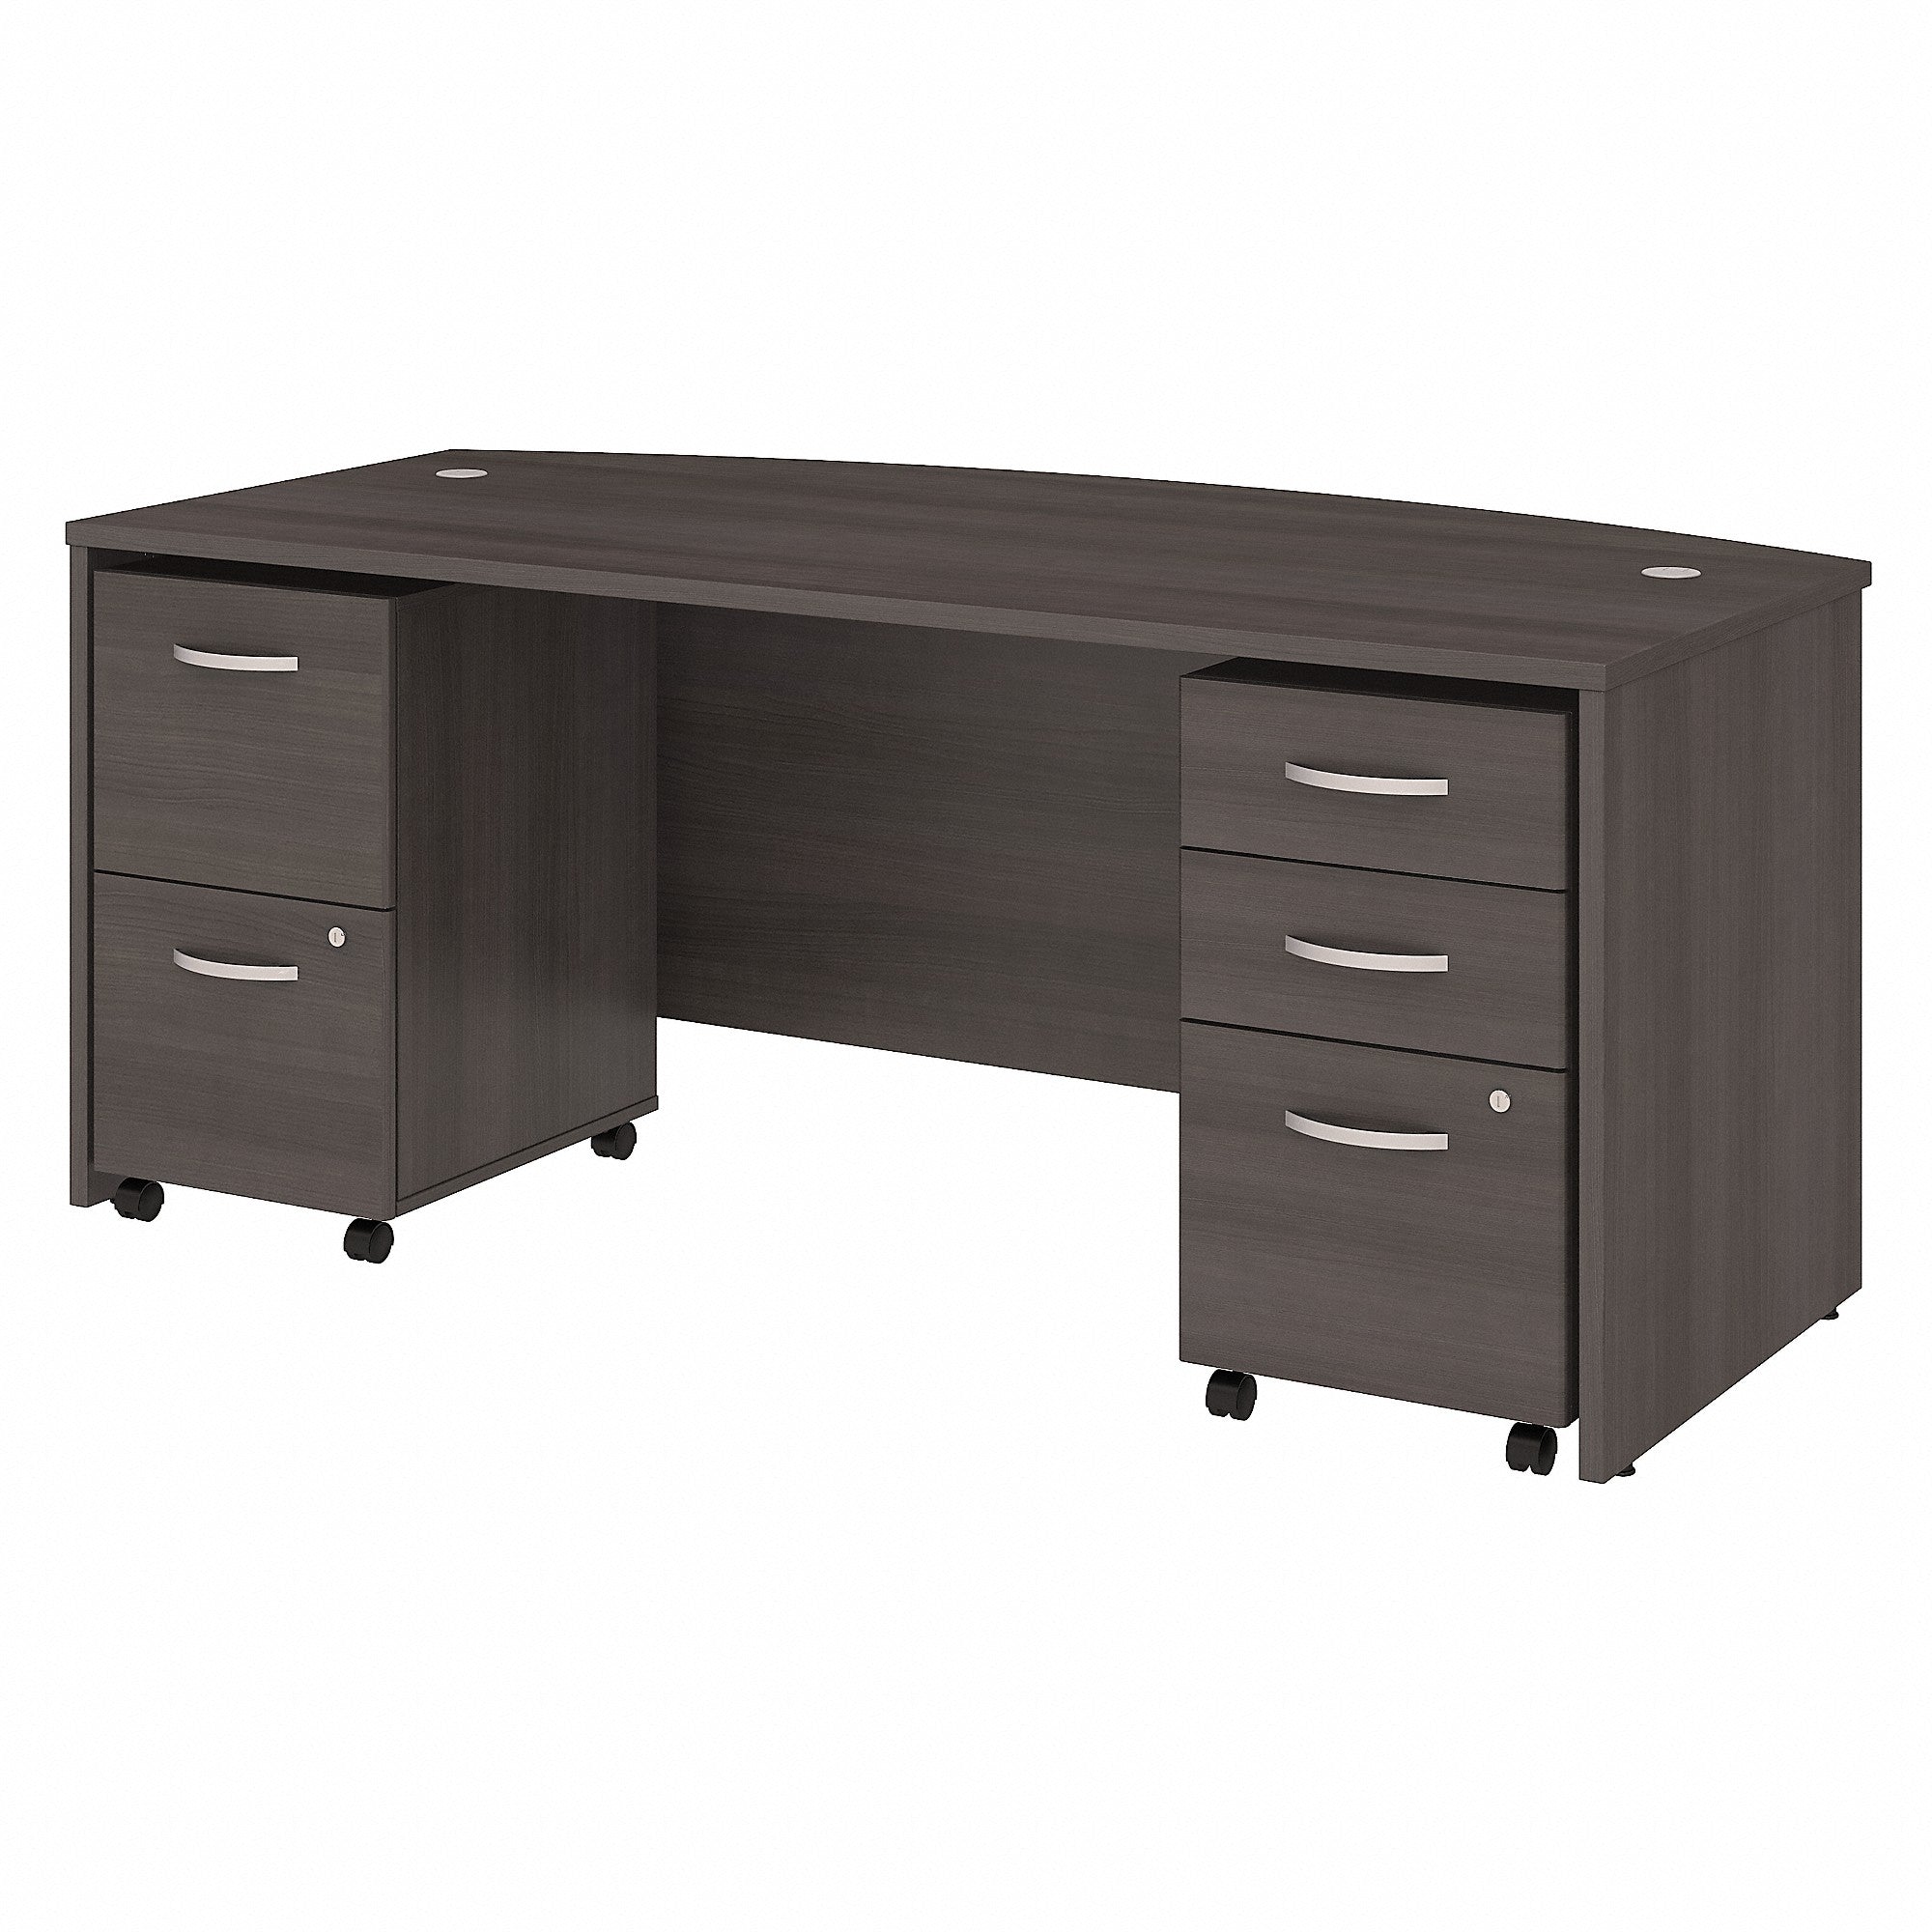 Bush Business Furniture Studio C 72W x 36D Bow Front Desk with Mobile File Cabinets | Storm Gray